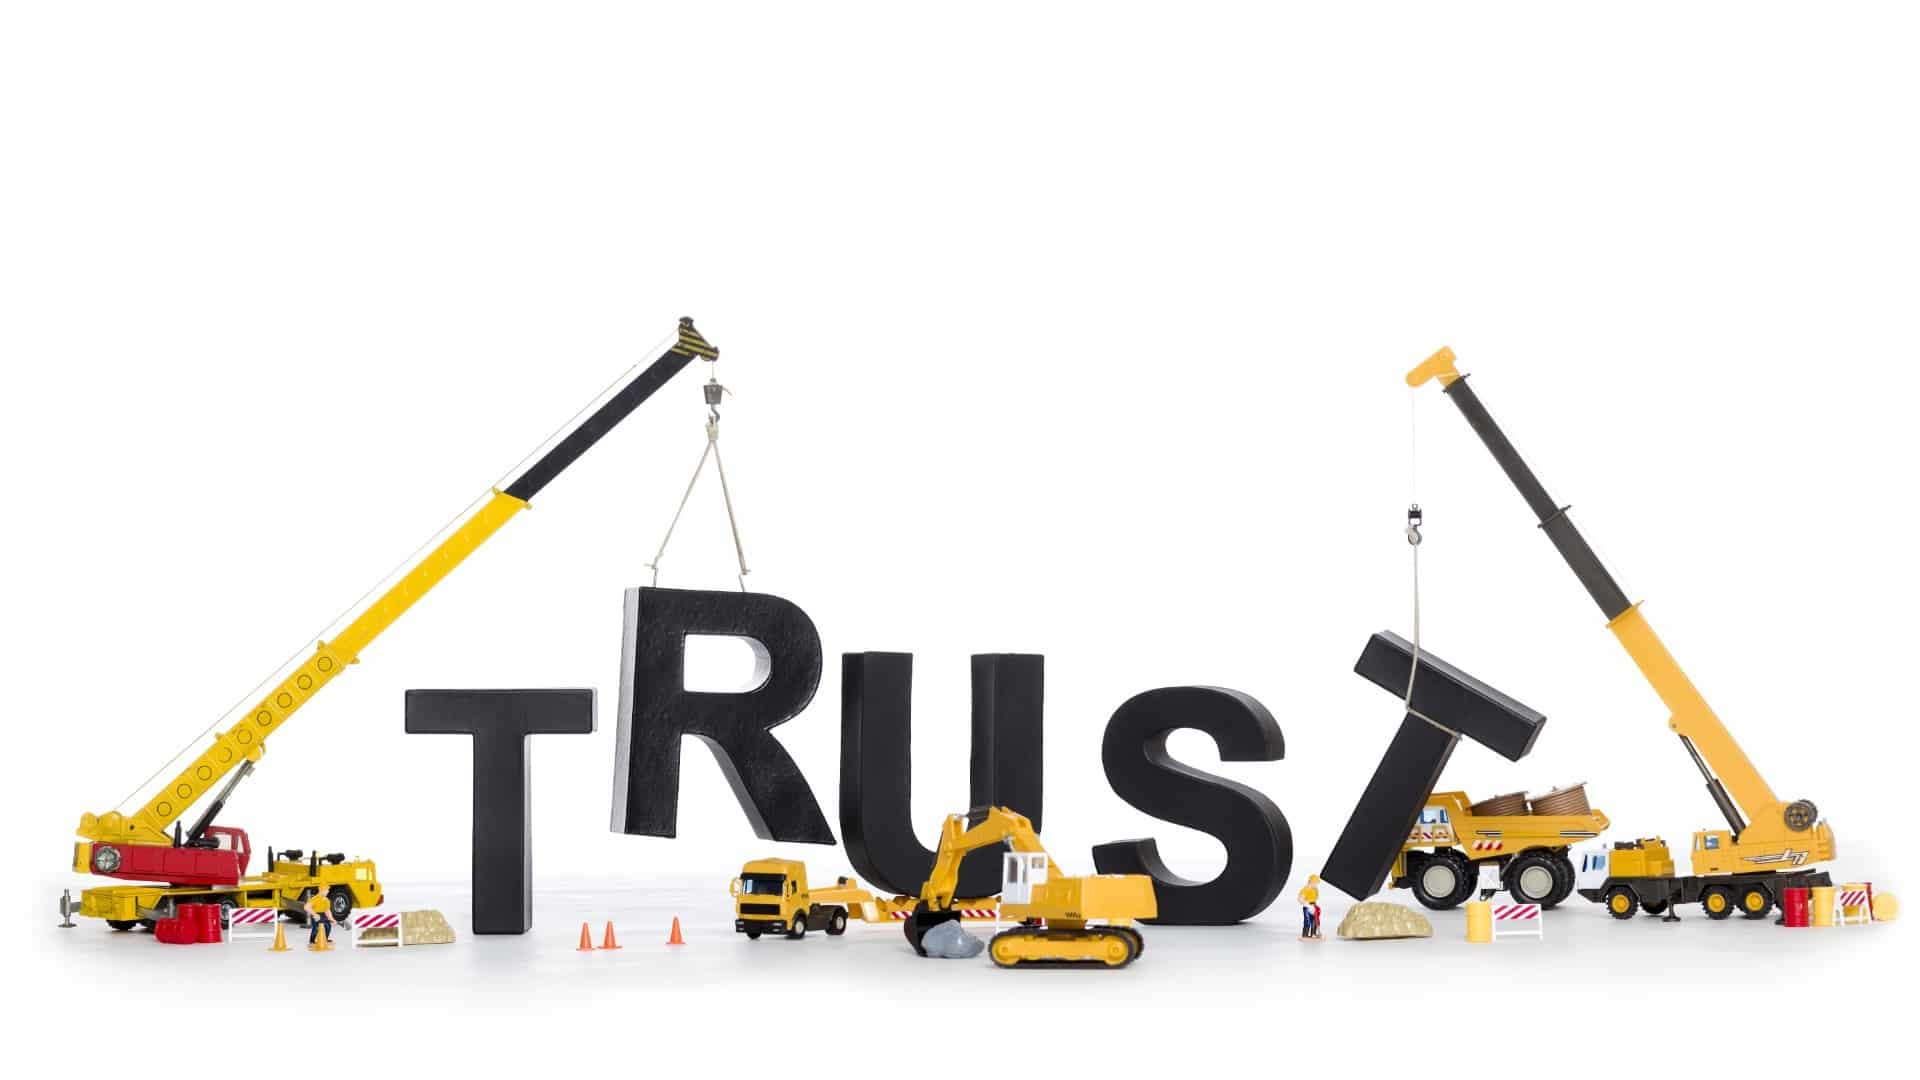 Toy construction equipment building the word "trust"